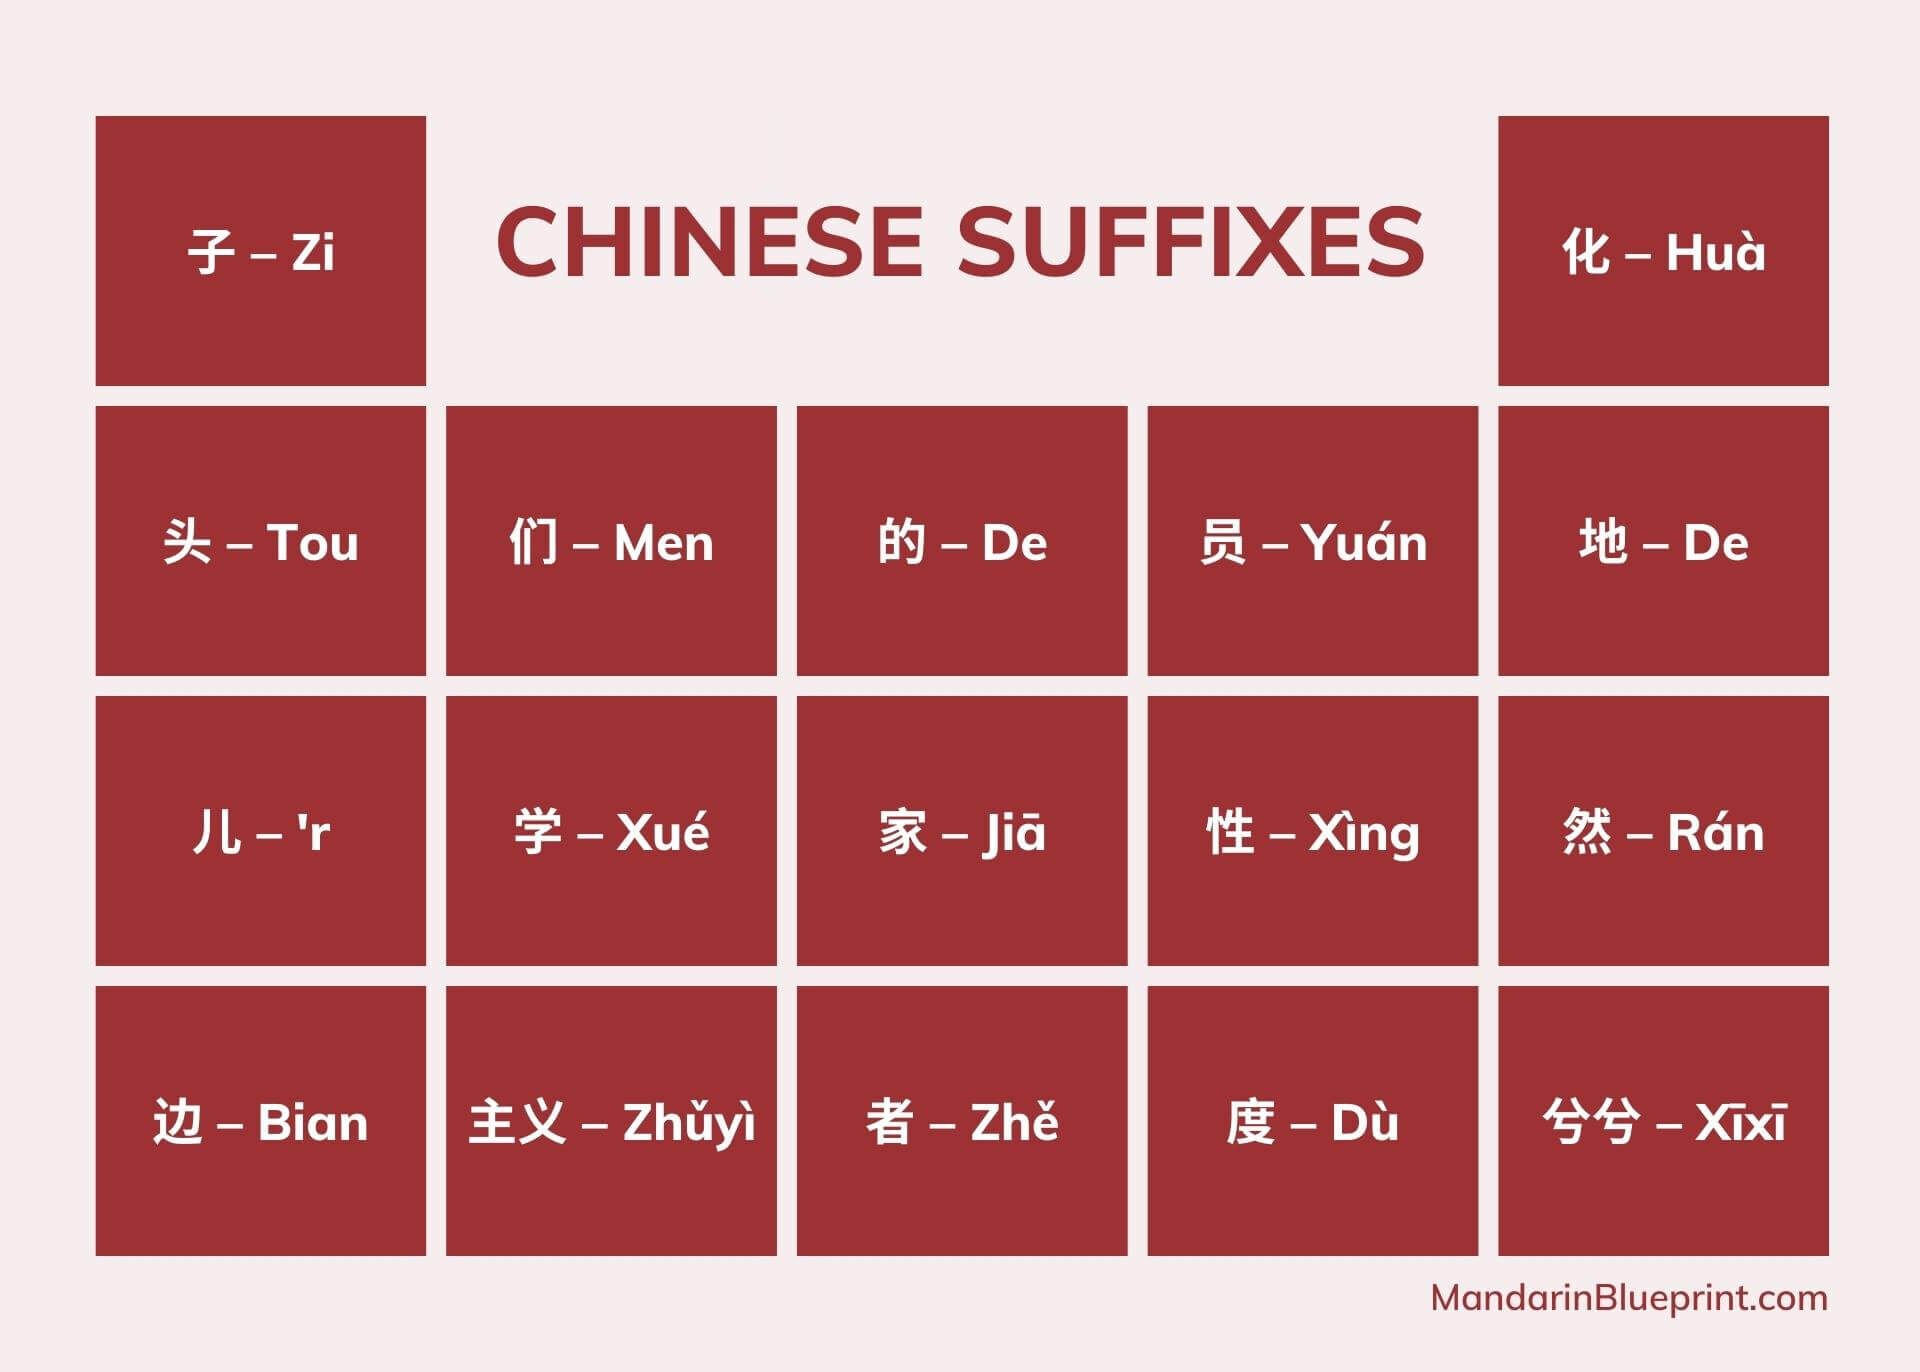 Chinese suffixes